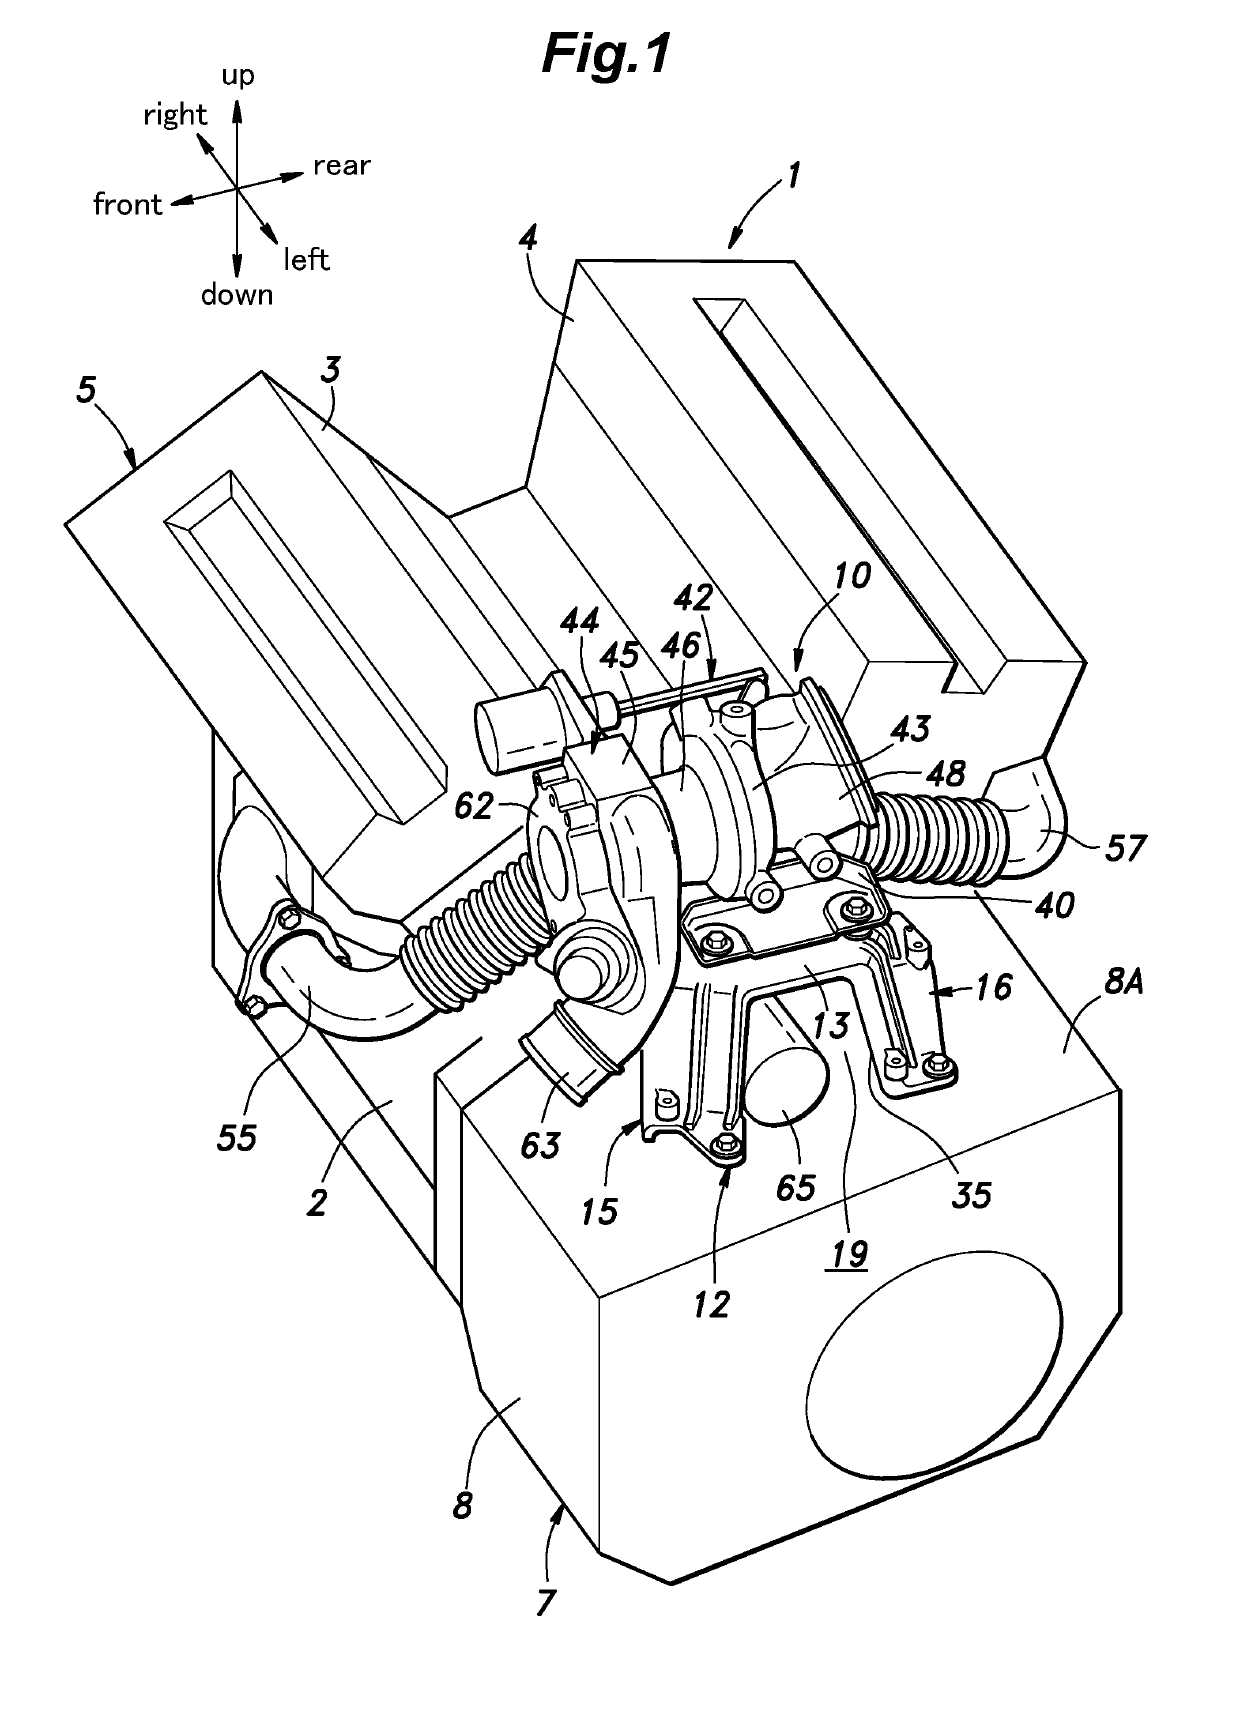 Internal combustion engine provided with turbocharger